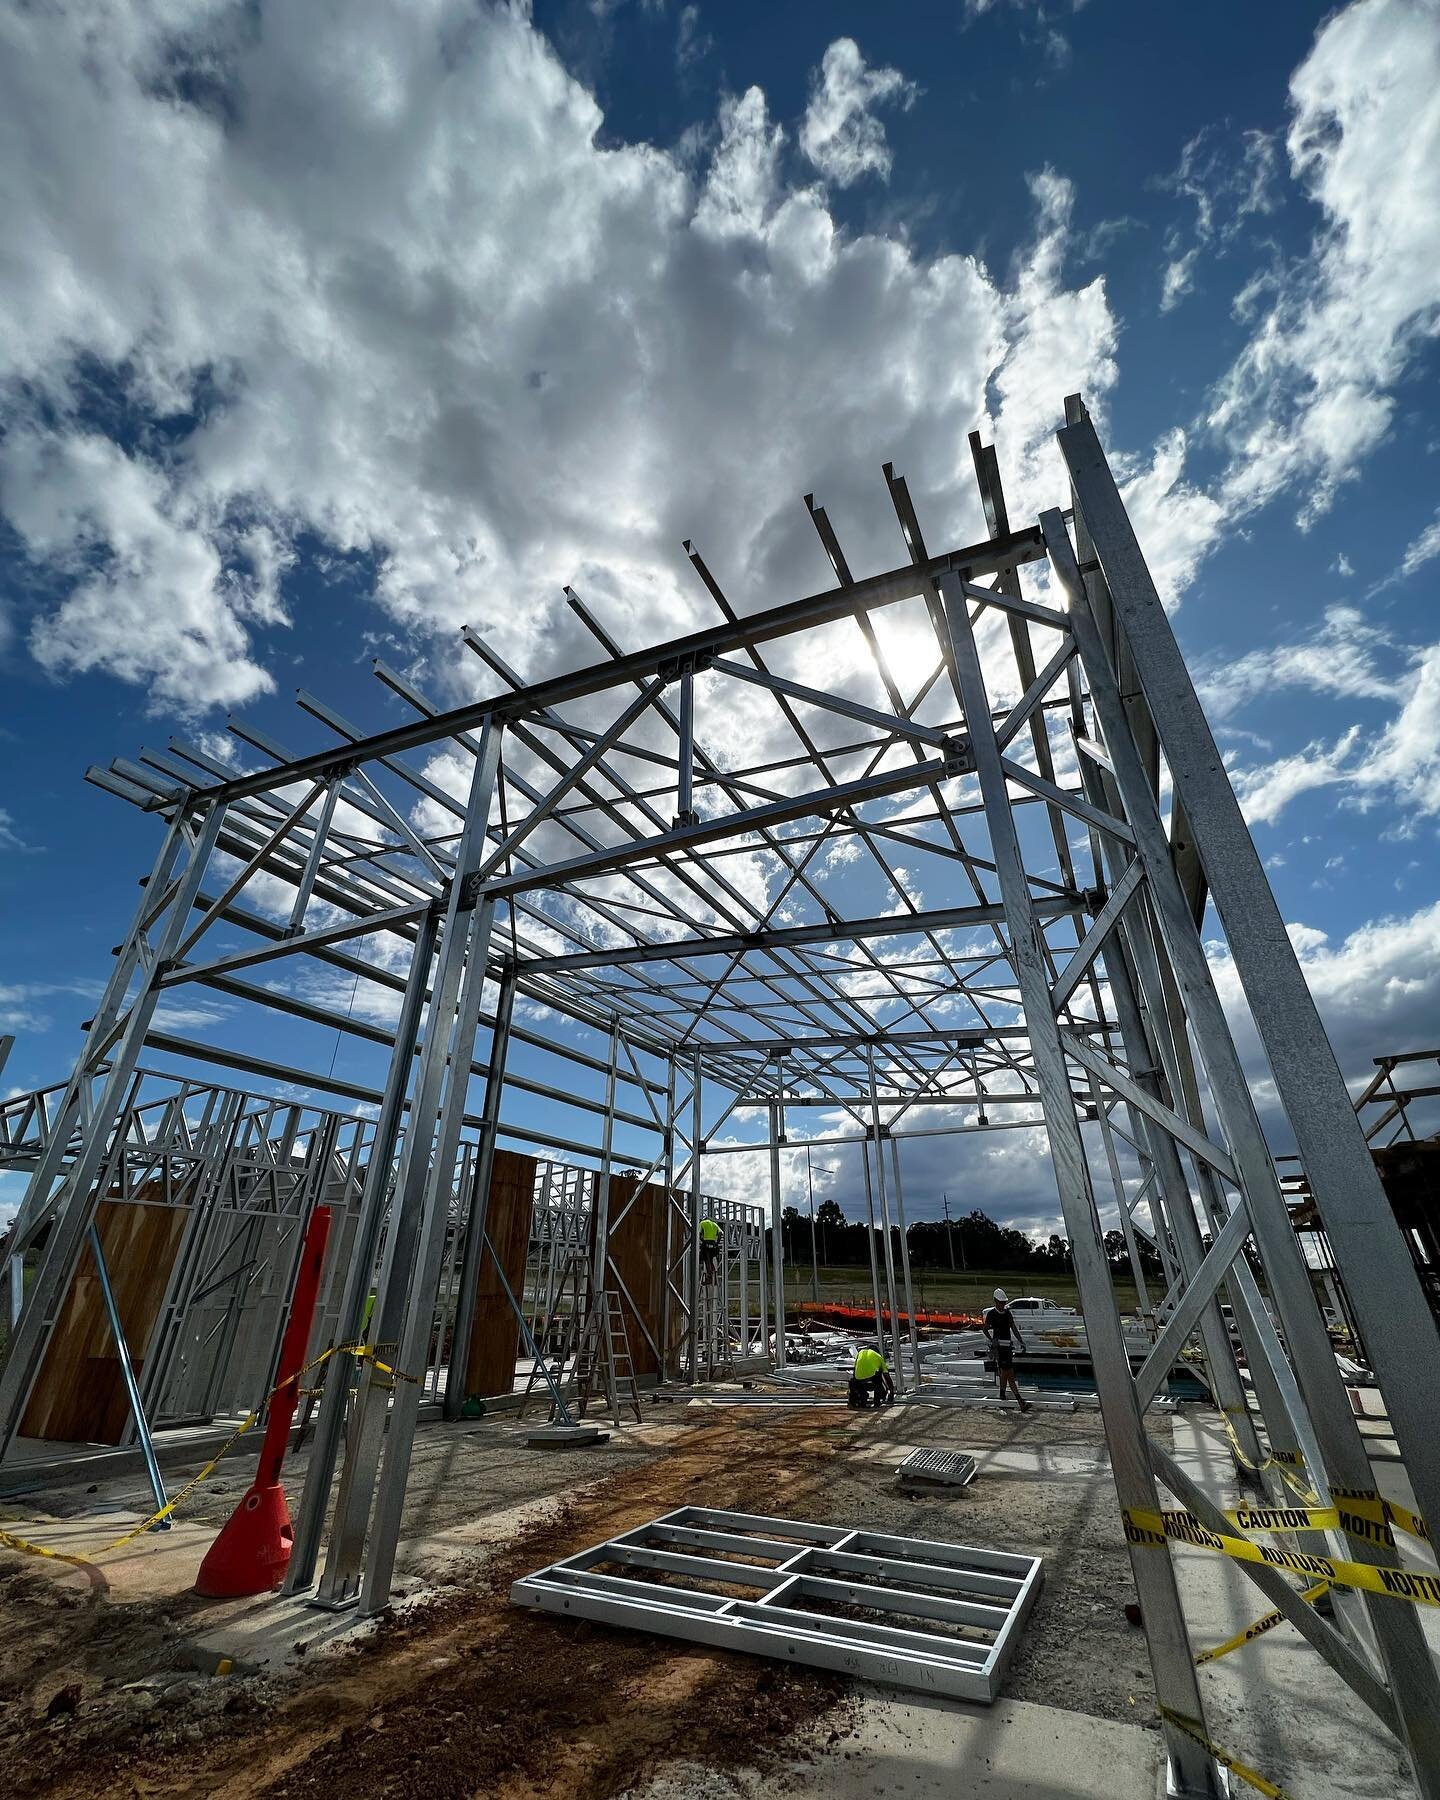 Current Project - Oran Park Fire Station🧑🏽&zwj;🚒🚒👩🏽&zwj;🚒 

NSW Government&rsquo;s ongoing commitment to ensuring the safety of our local community. 

Swipe to see the view ➡️➡️
.
.
.
.
.
.
#dmccivilandstructural #steel #engineering #firestati